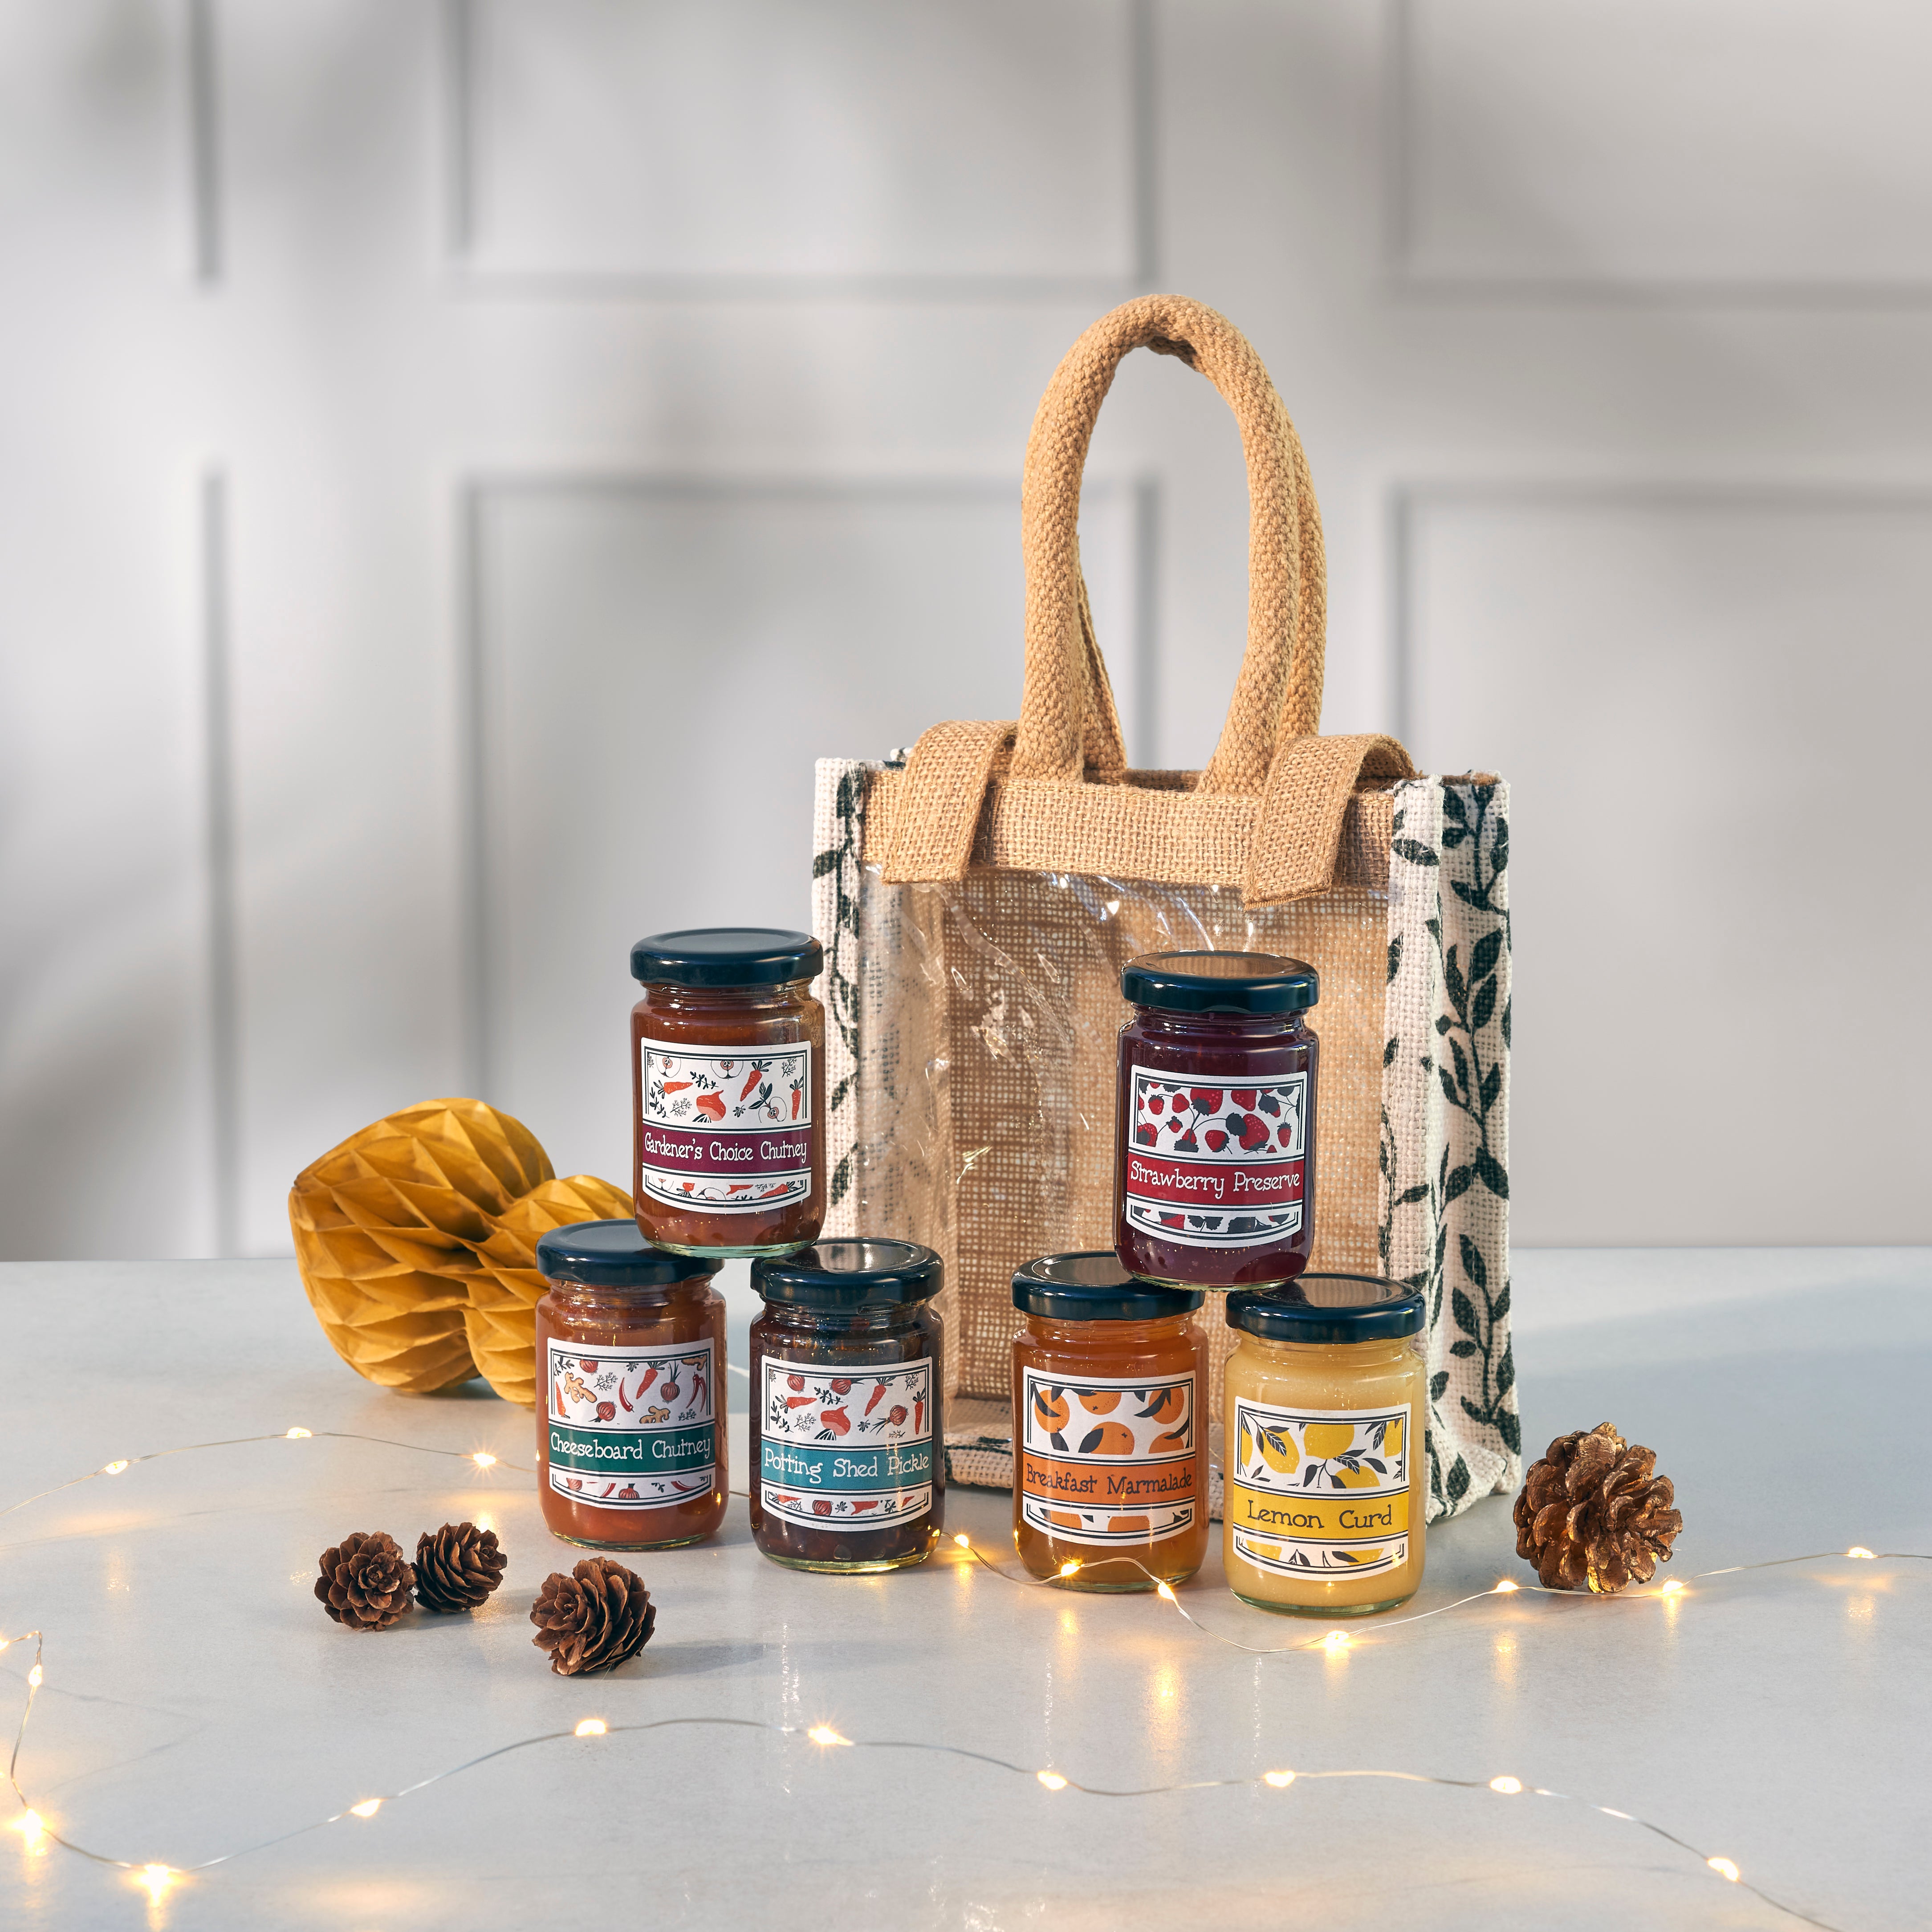 An image of the Jute Bag with Chutney and Preserves.